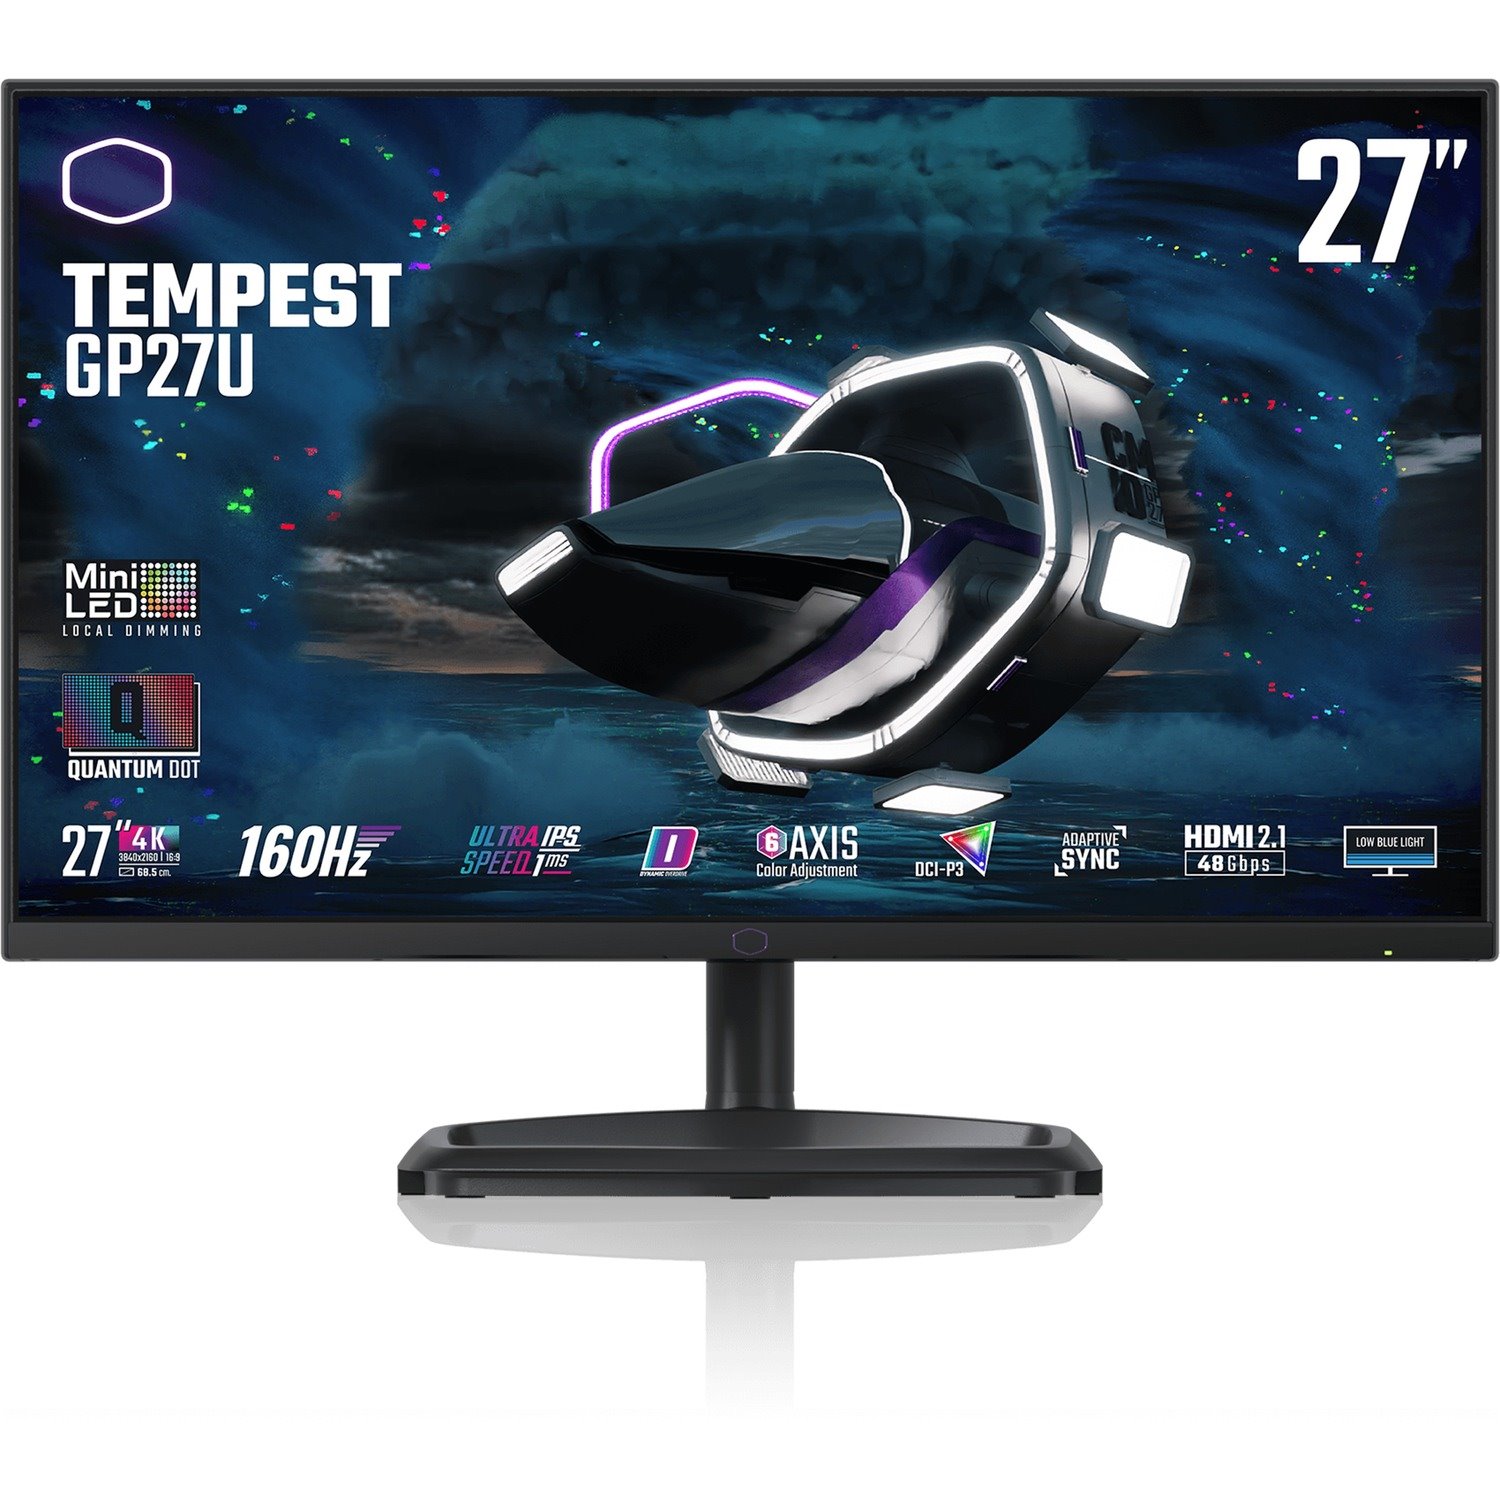 Cooler Master Tempest GP27-FUS 27" Class 4K UHD Gaming LCD Monitor - 16:9